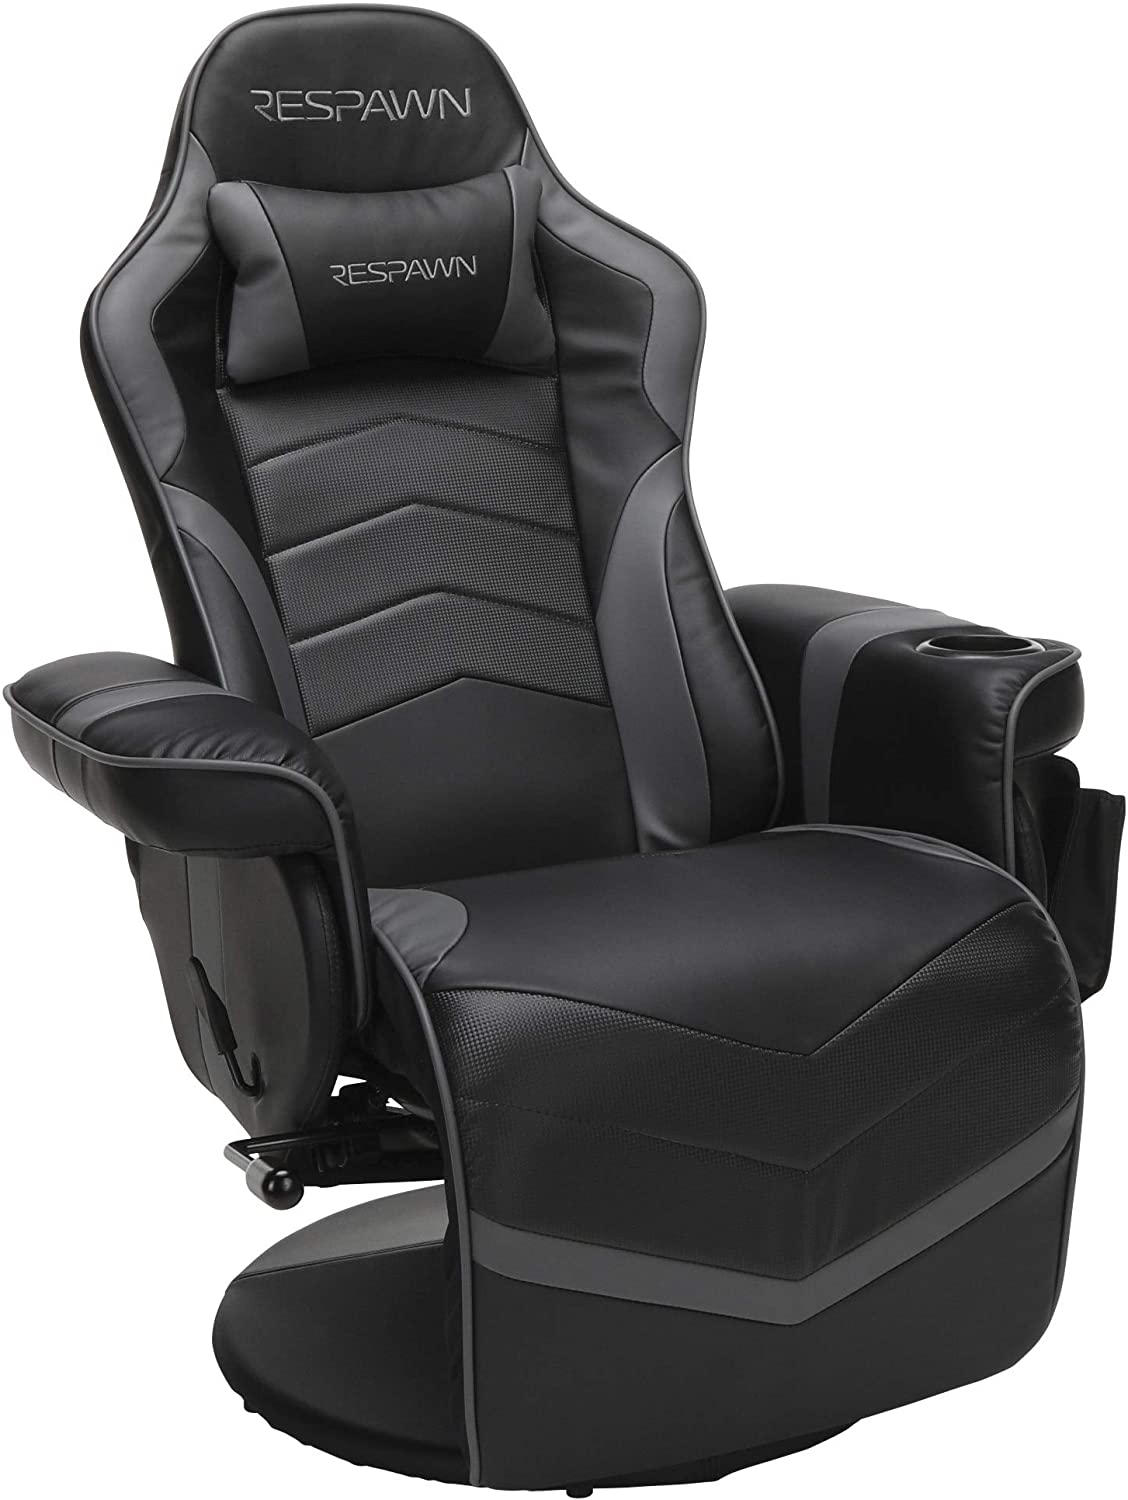 RESPAWN 900 Racing Style Gaming Recliner